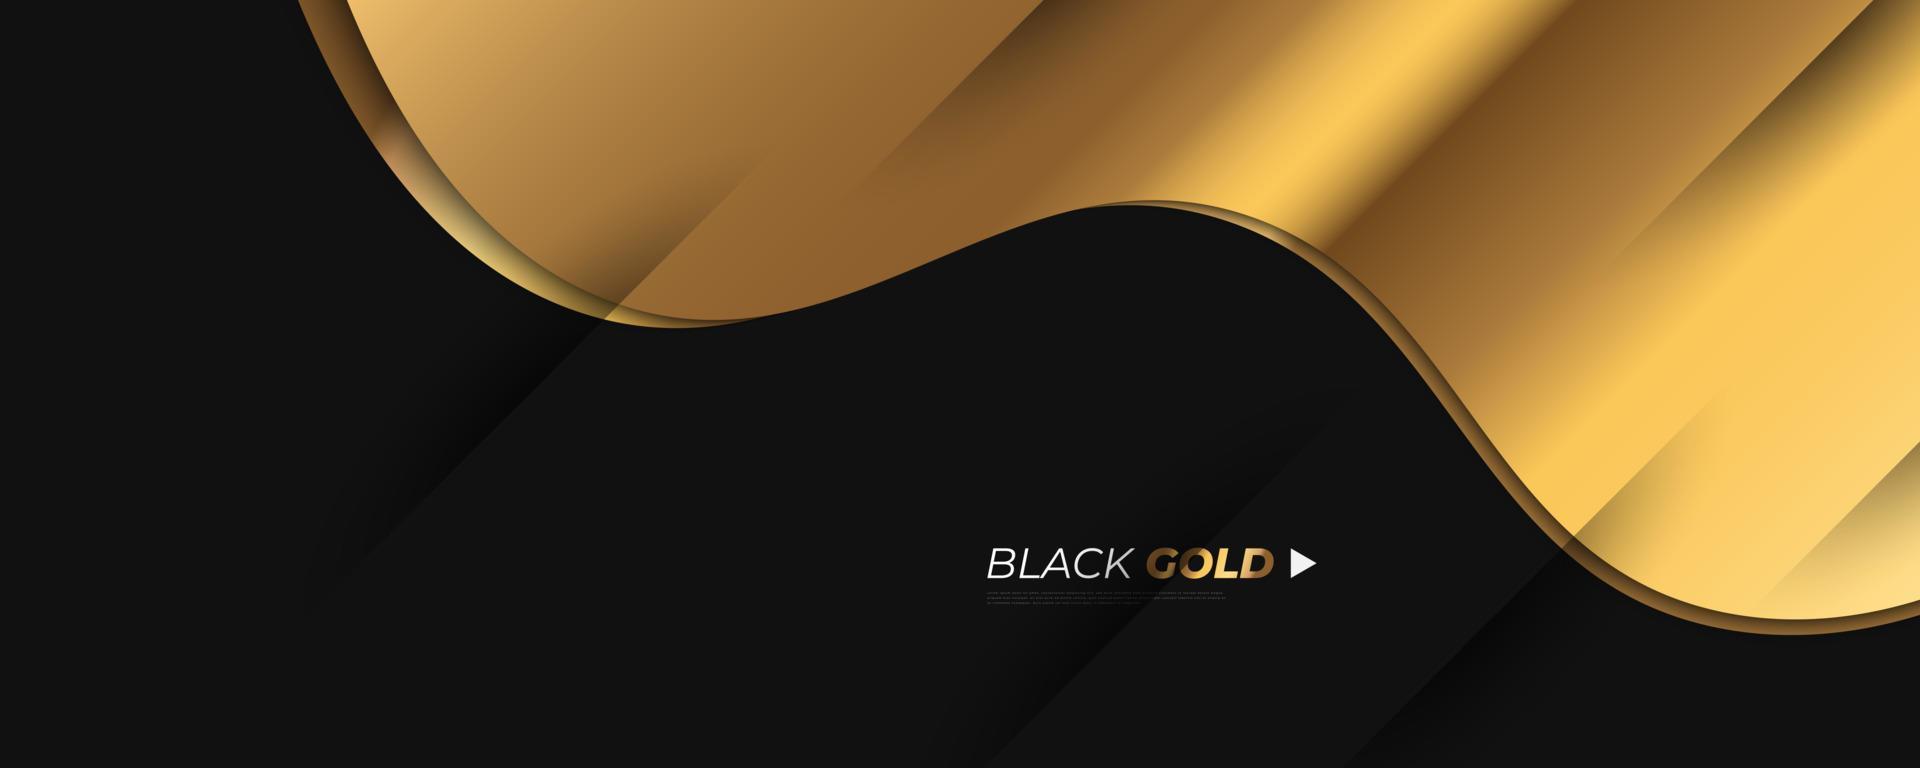 Luxury Black and Gold Background in Paper Cut Style with Glitter and Light Effect. Premium Black and Gold Background for Award, Nomination, Ceremony, Formal Invitation or Certificate Design vector